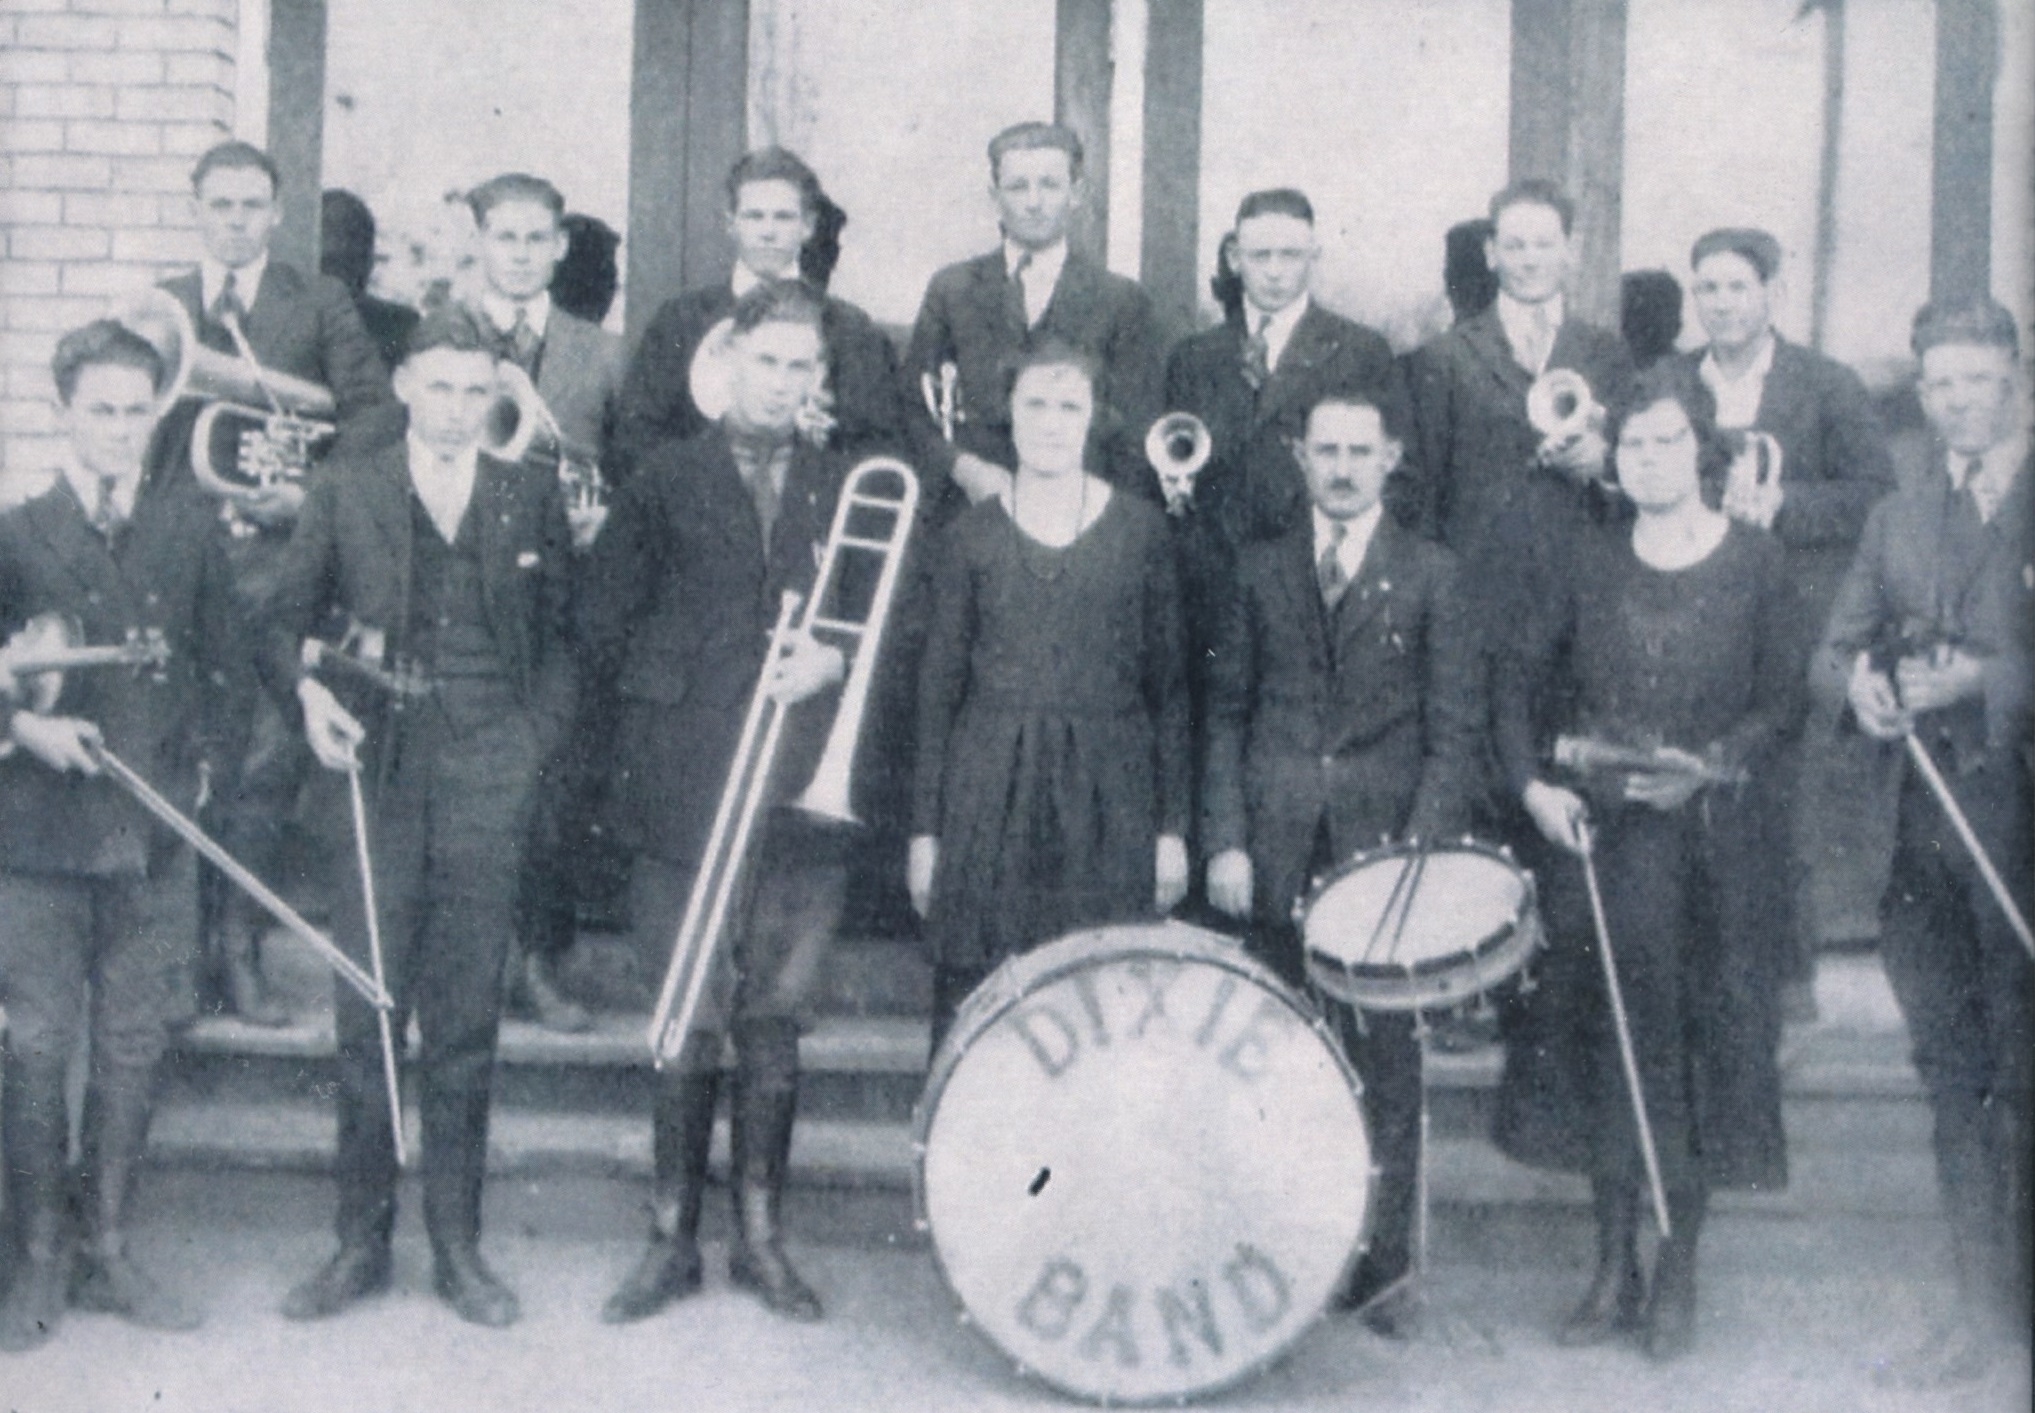 The Dixie Band